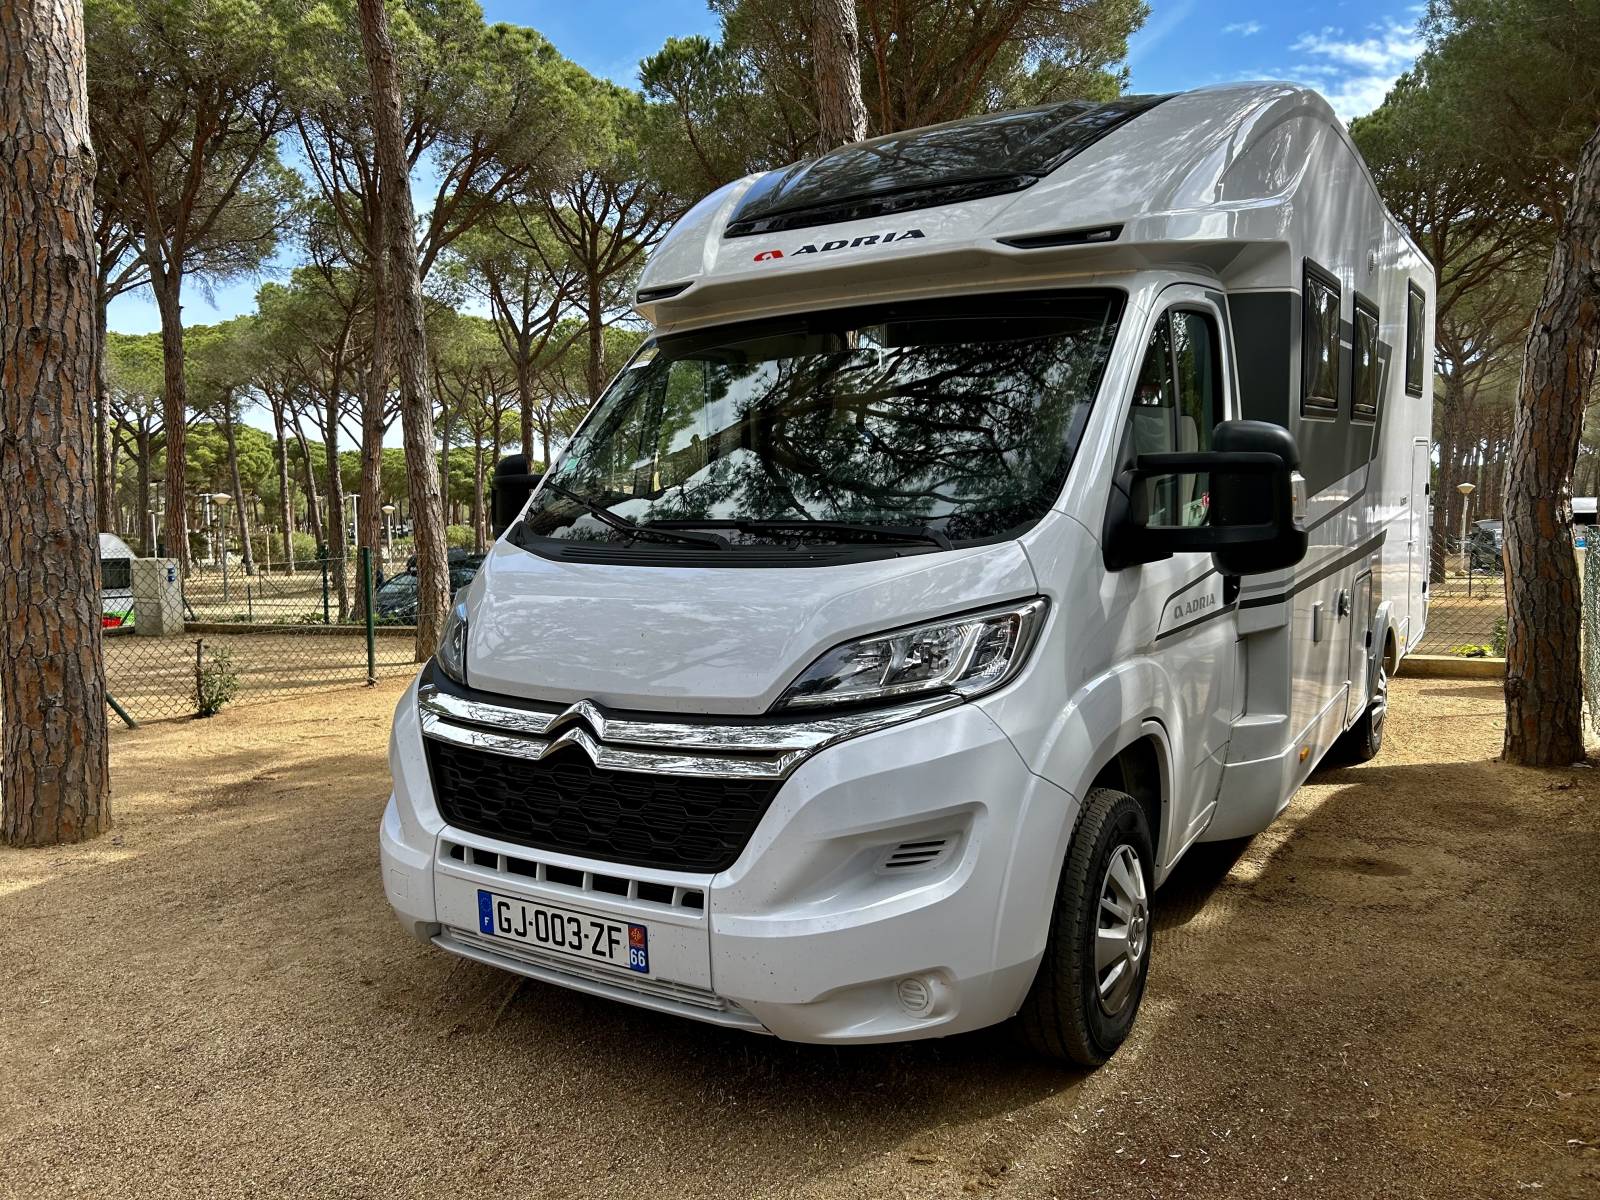 gps lucampers camping car – Compra gps lucampers camping car con